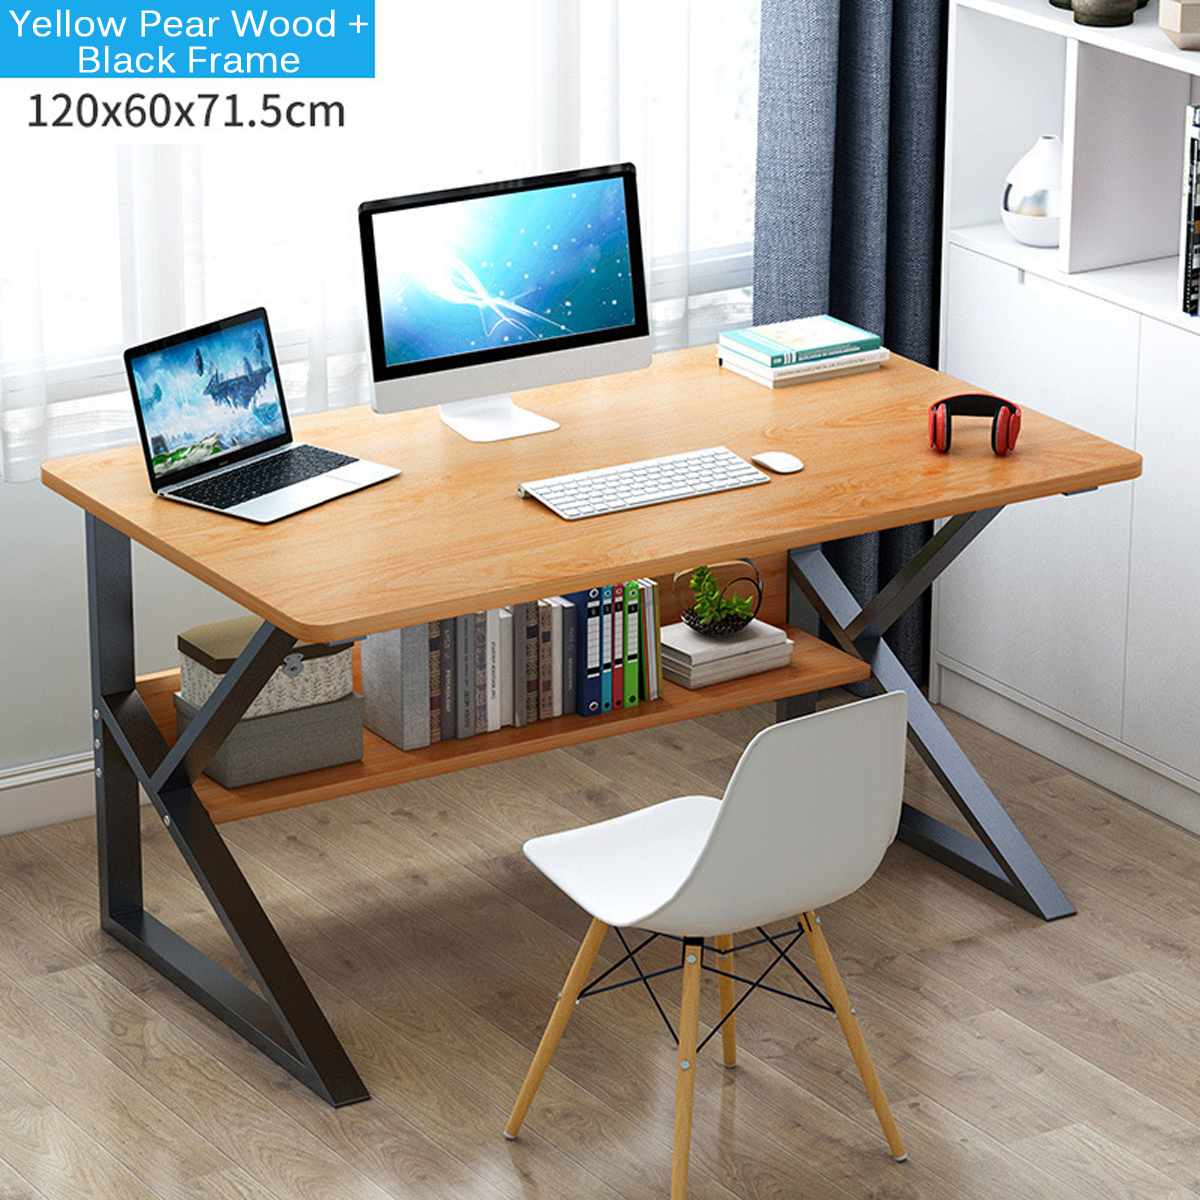 Computer-Desk-Student-Writing-Study-Table-Workstation-Laptop-Desk-Game-Table-with-Storage-Shelf-for--1783020-8